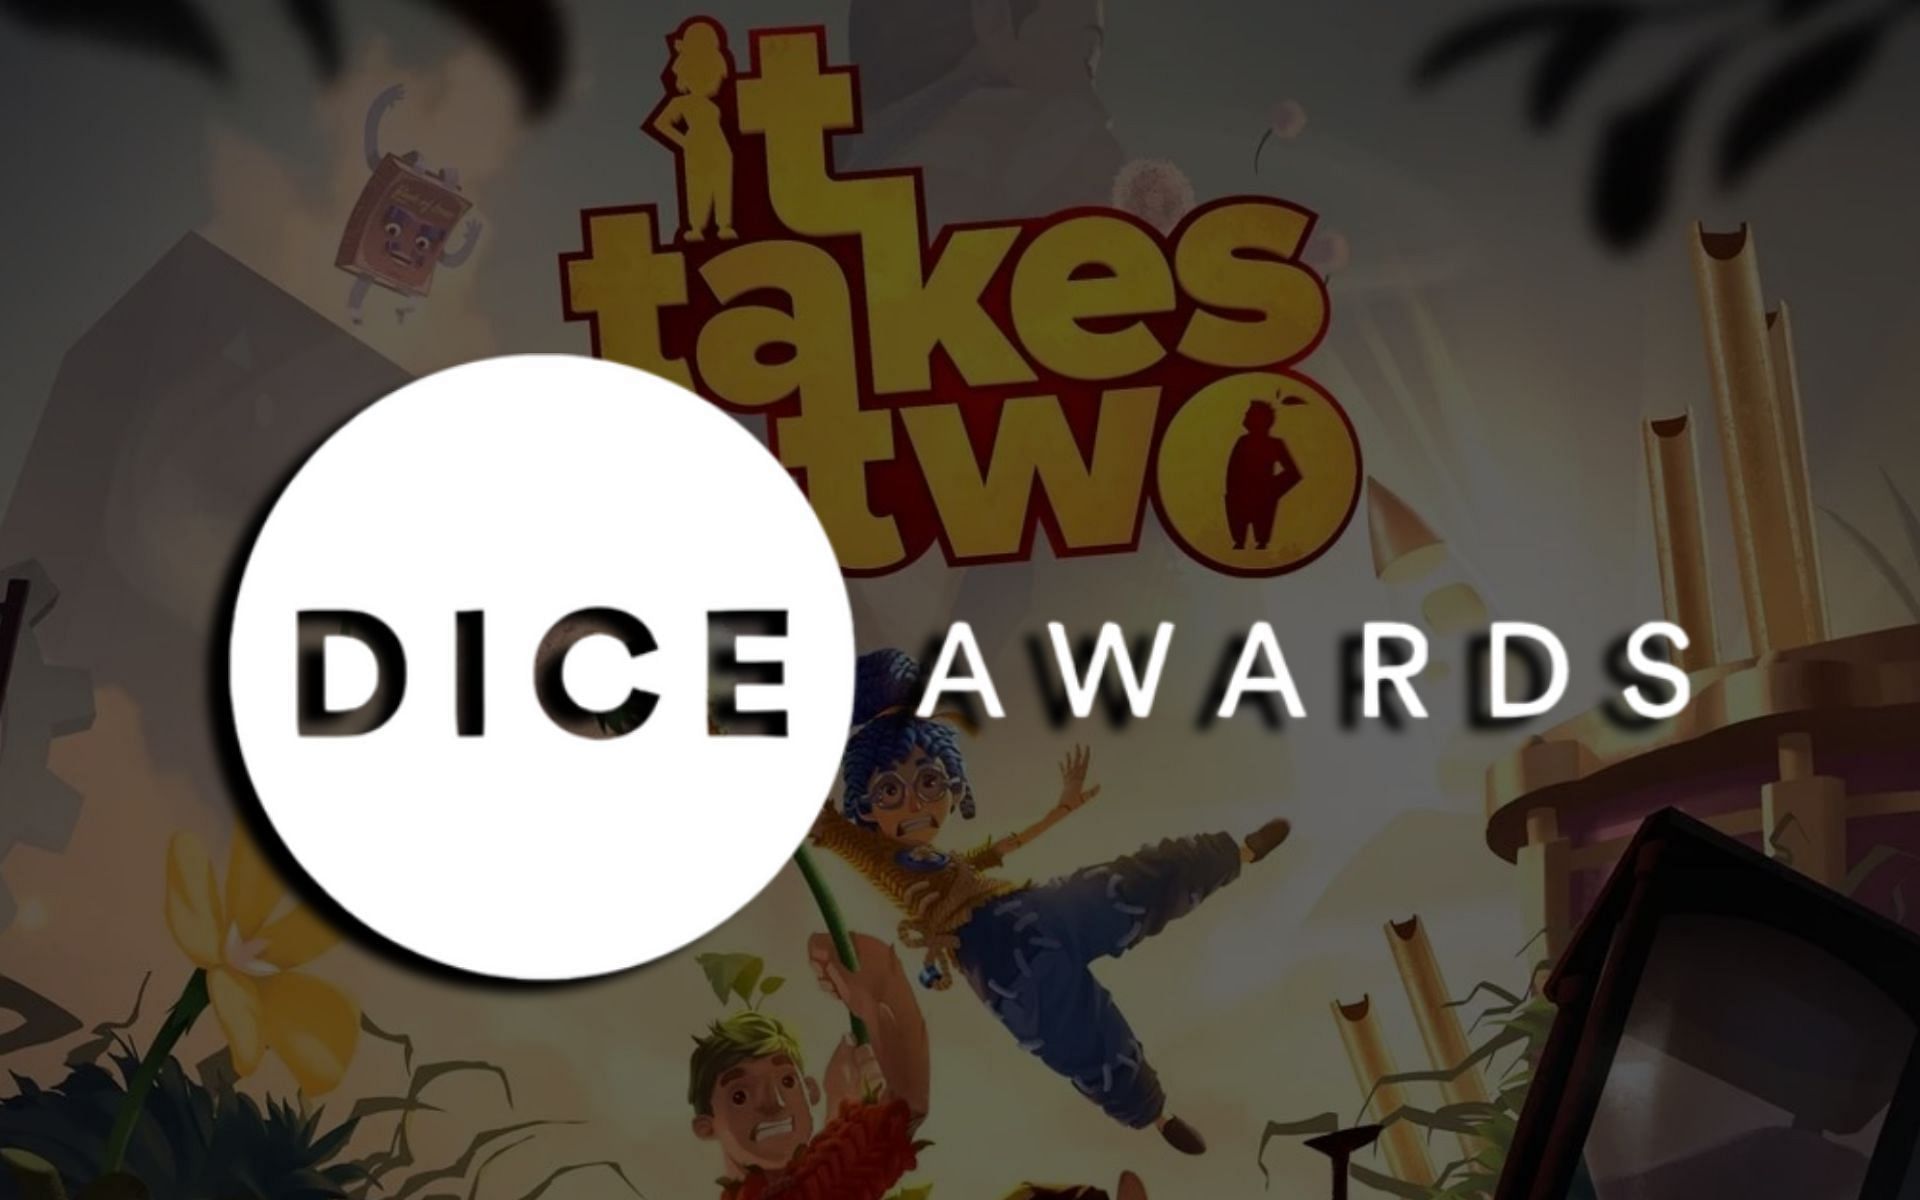 The D.I.C.E. Awards 2022 categories & nominees